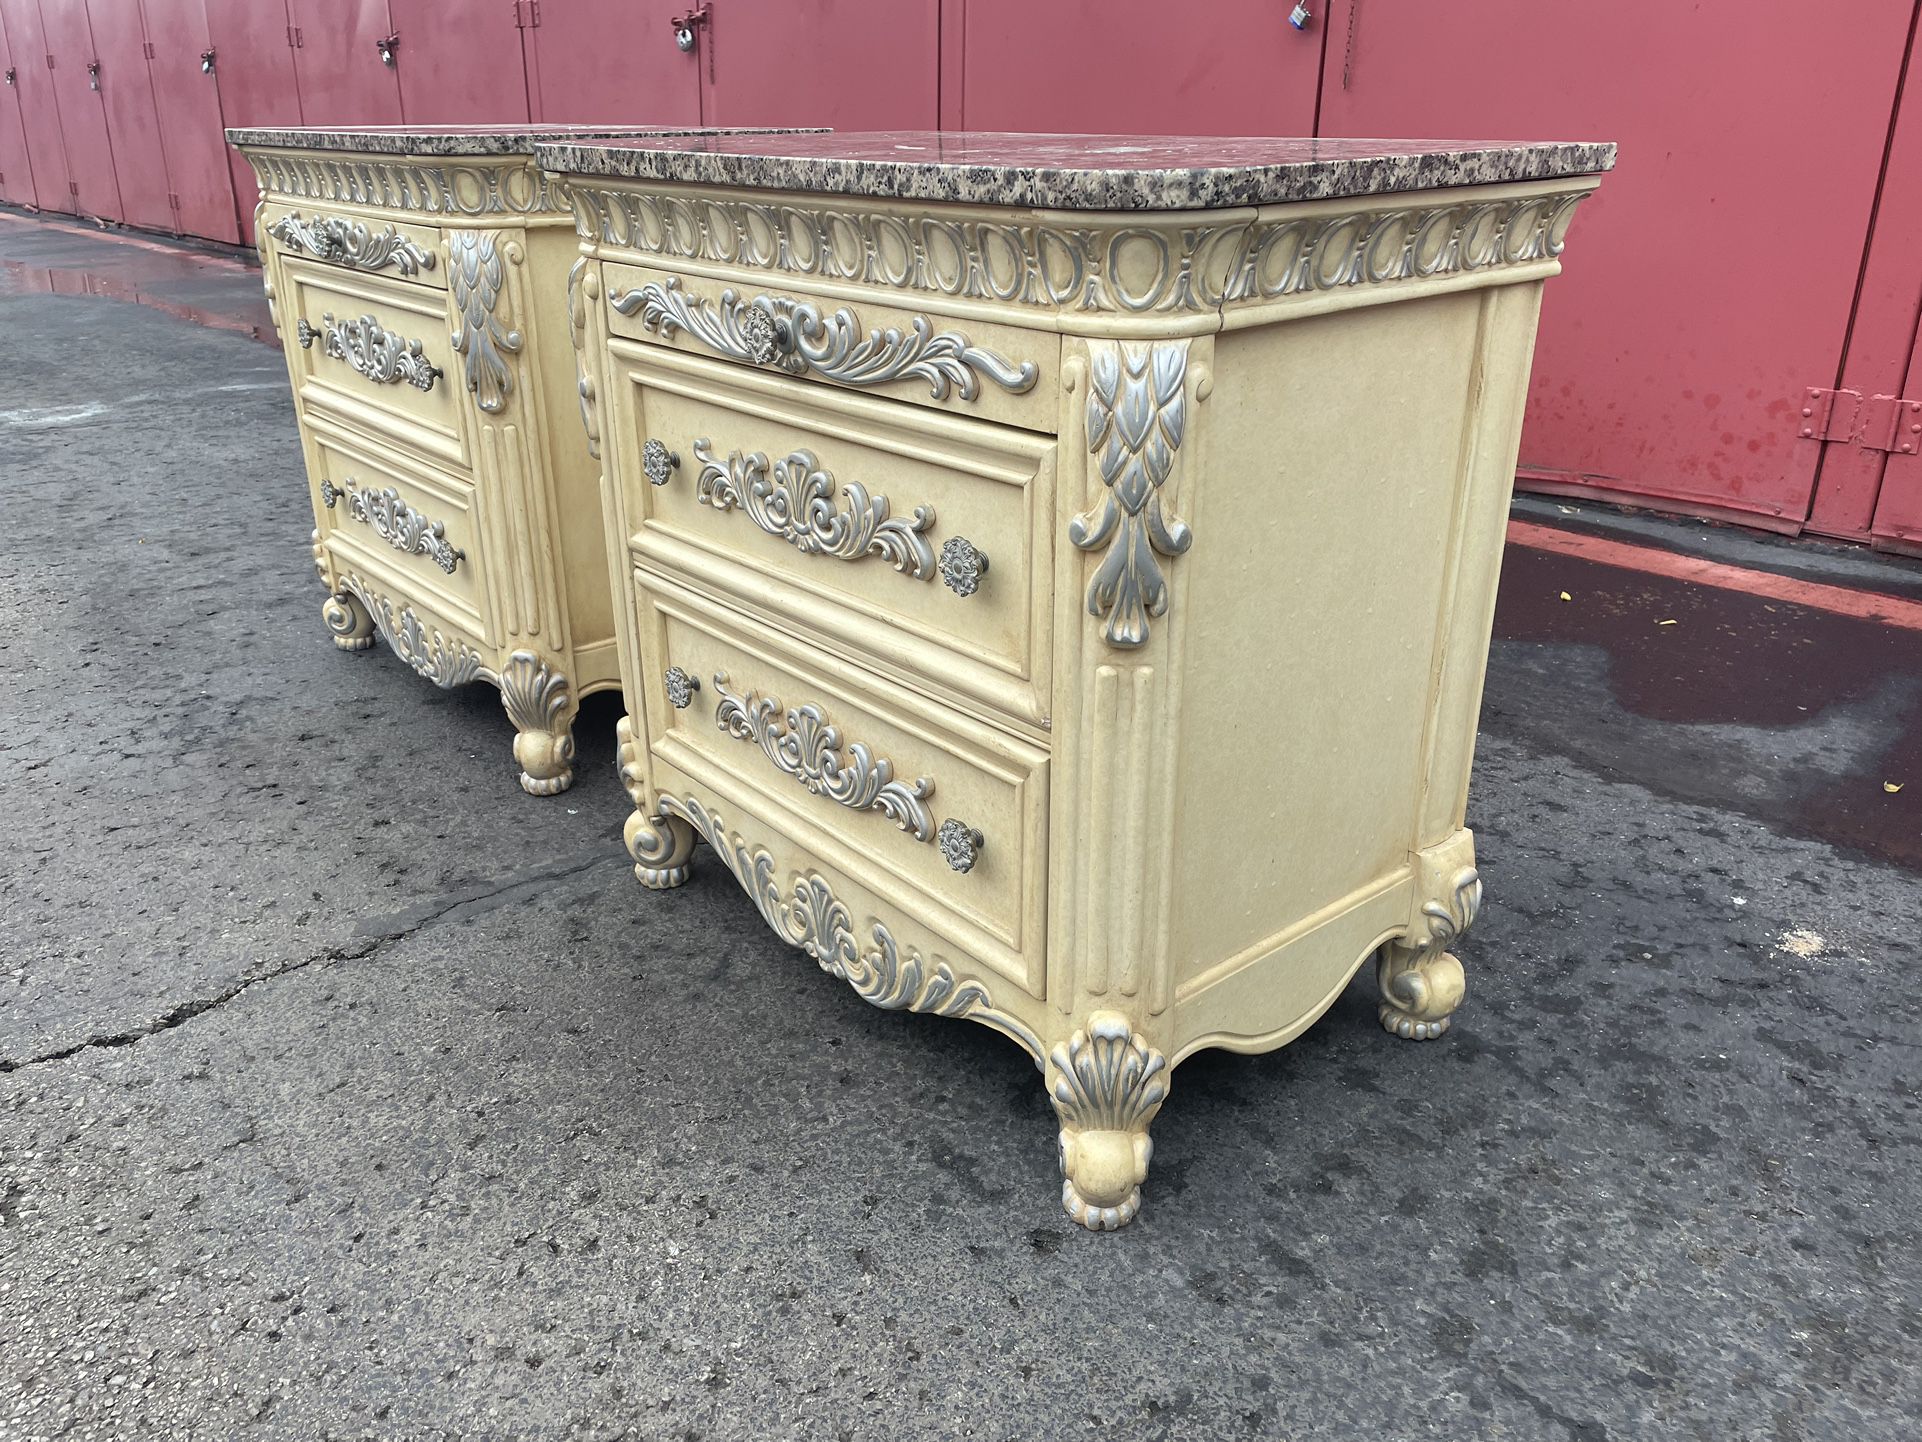 Two (2) tall large French style wood granite top two drawer with slide out tray night stands bed side end tables